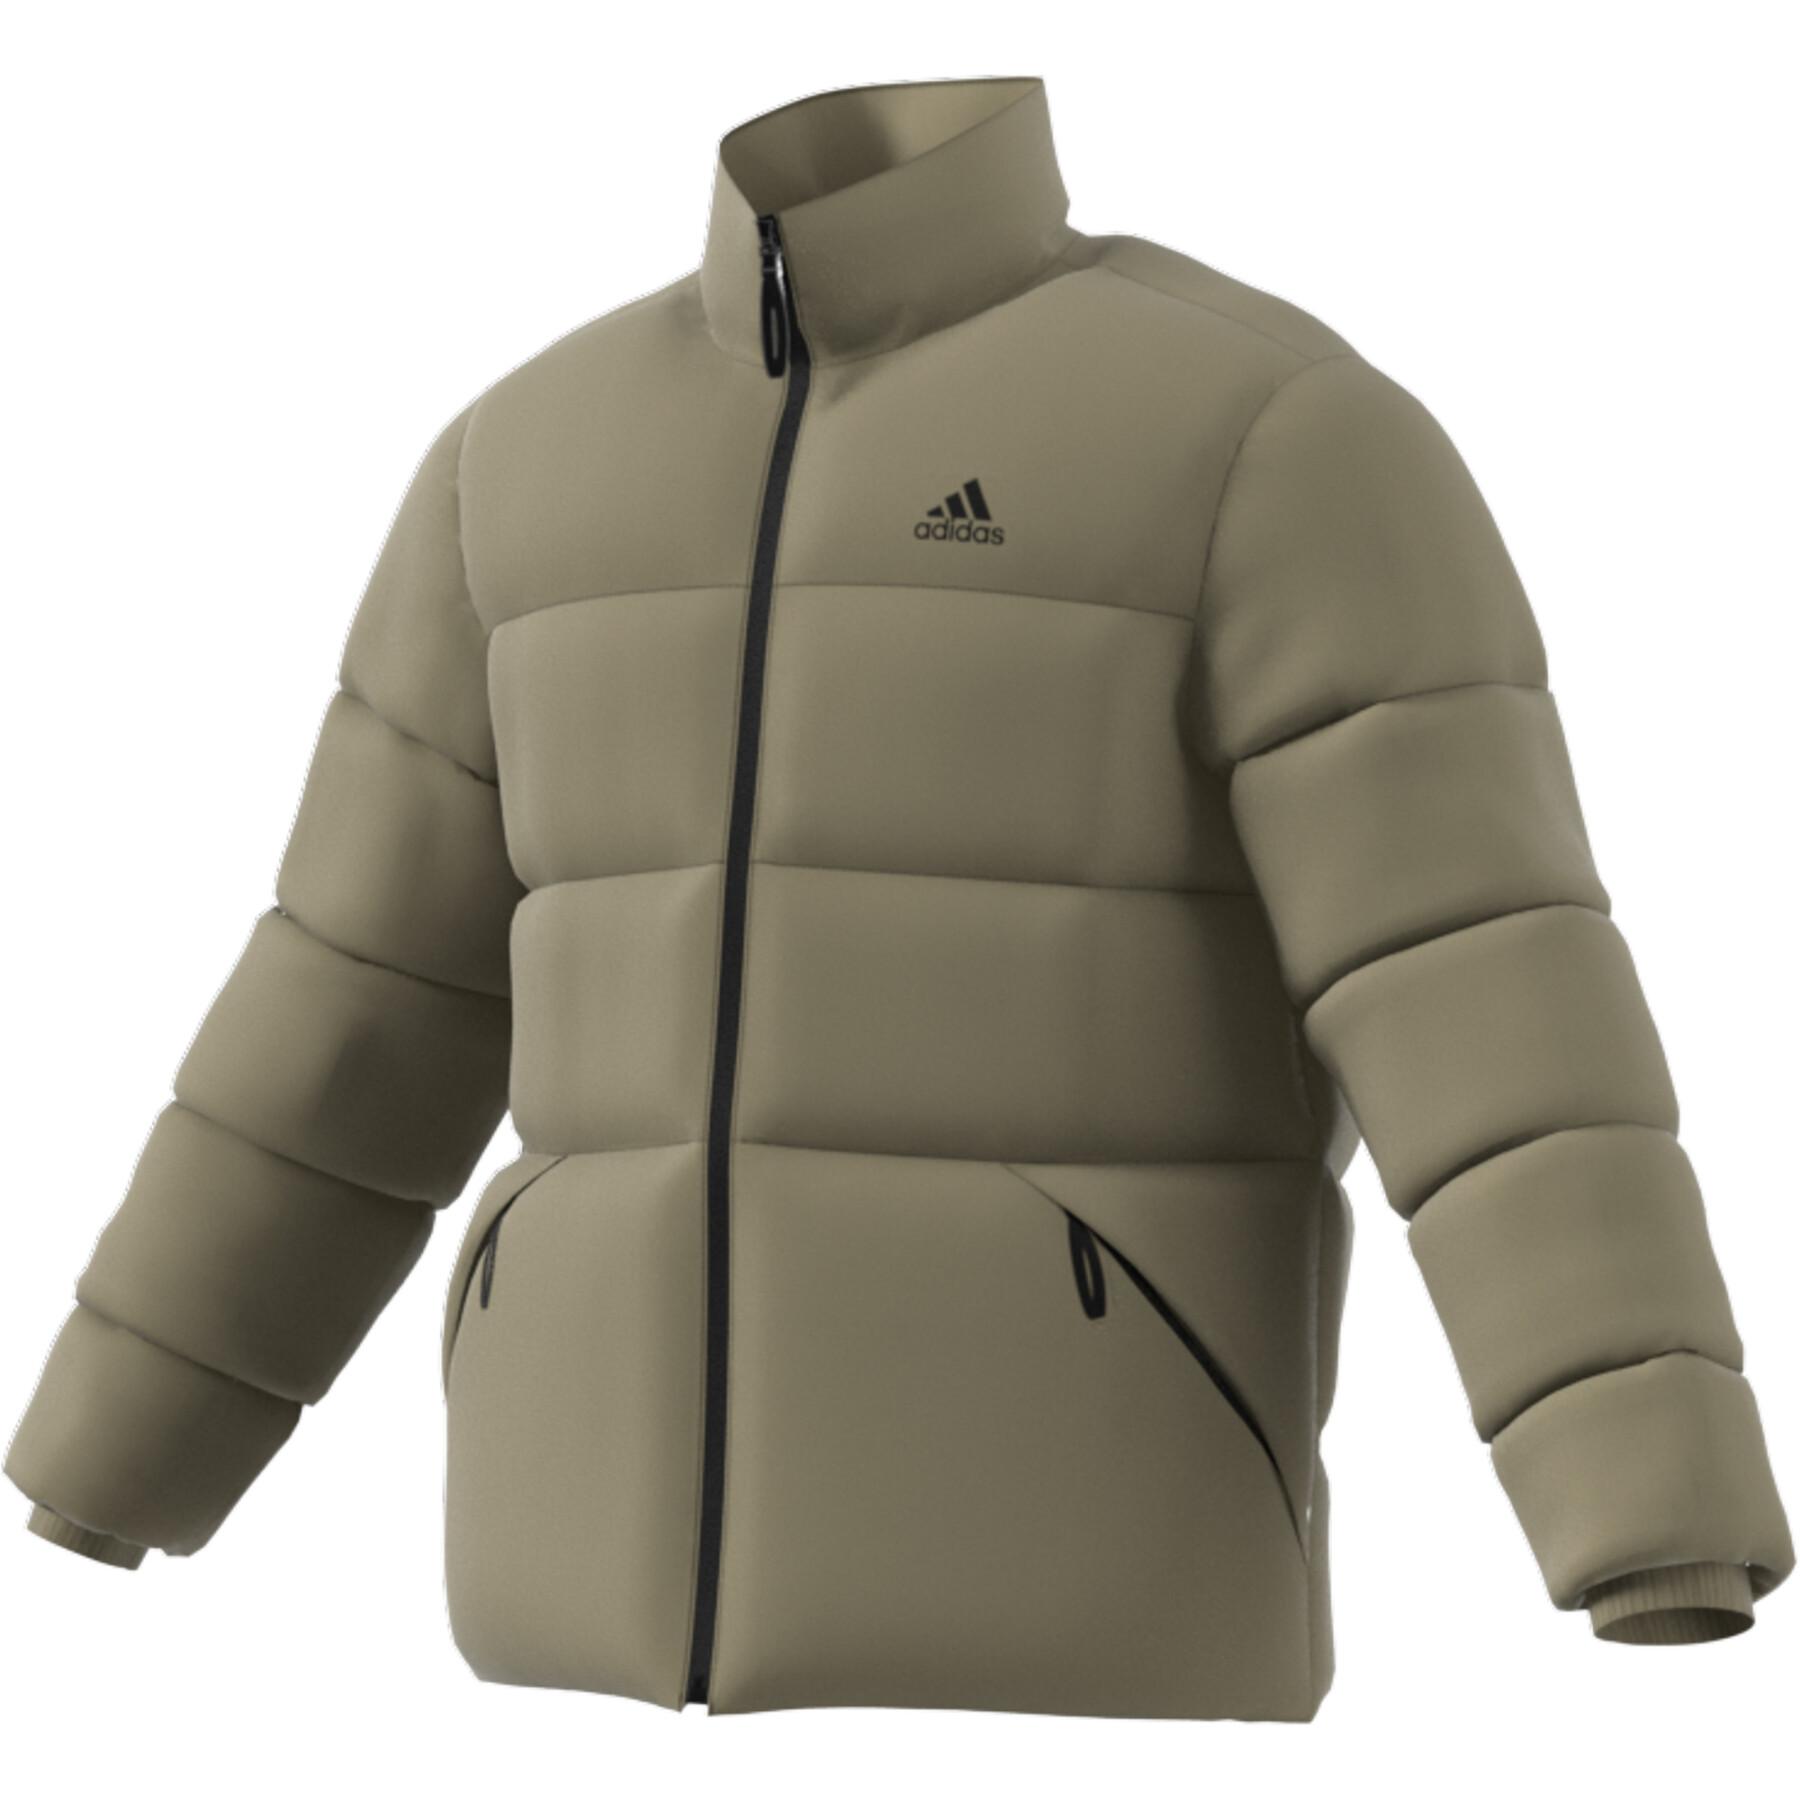 Donsjack adidas BSC 3-Stripes Insulated